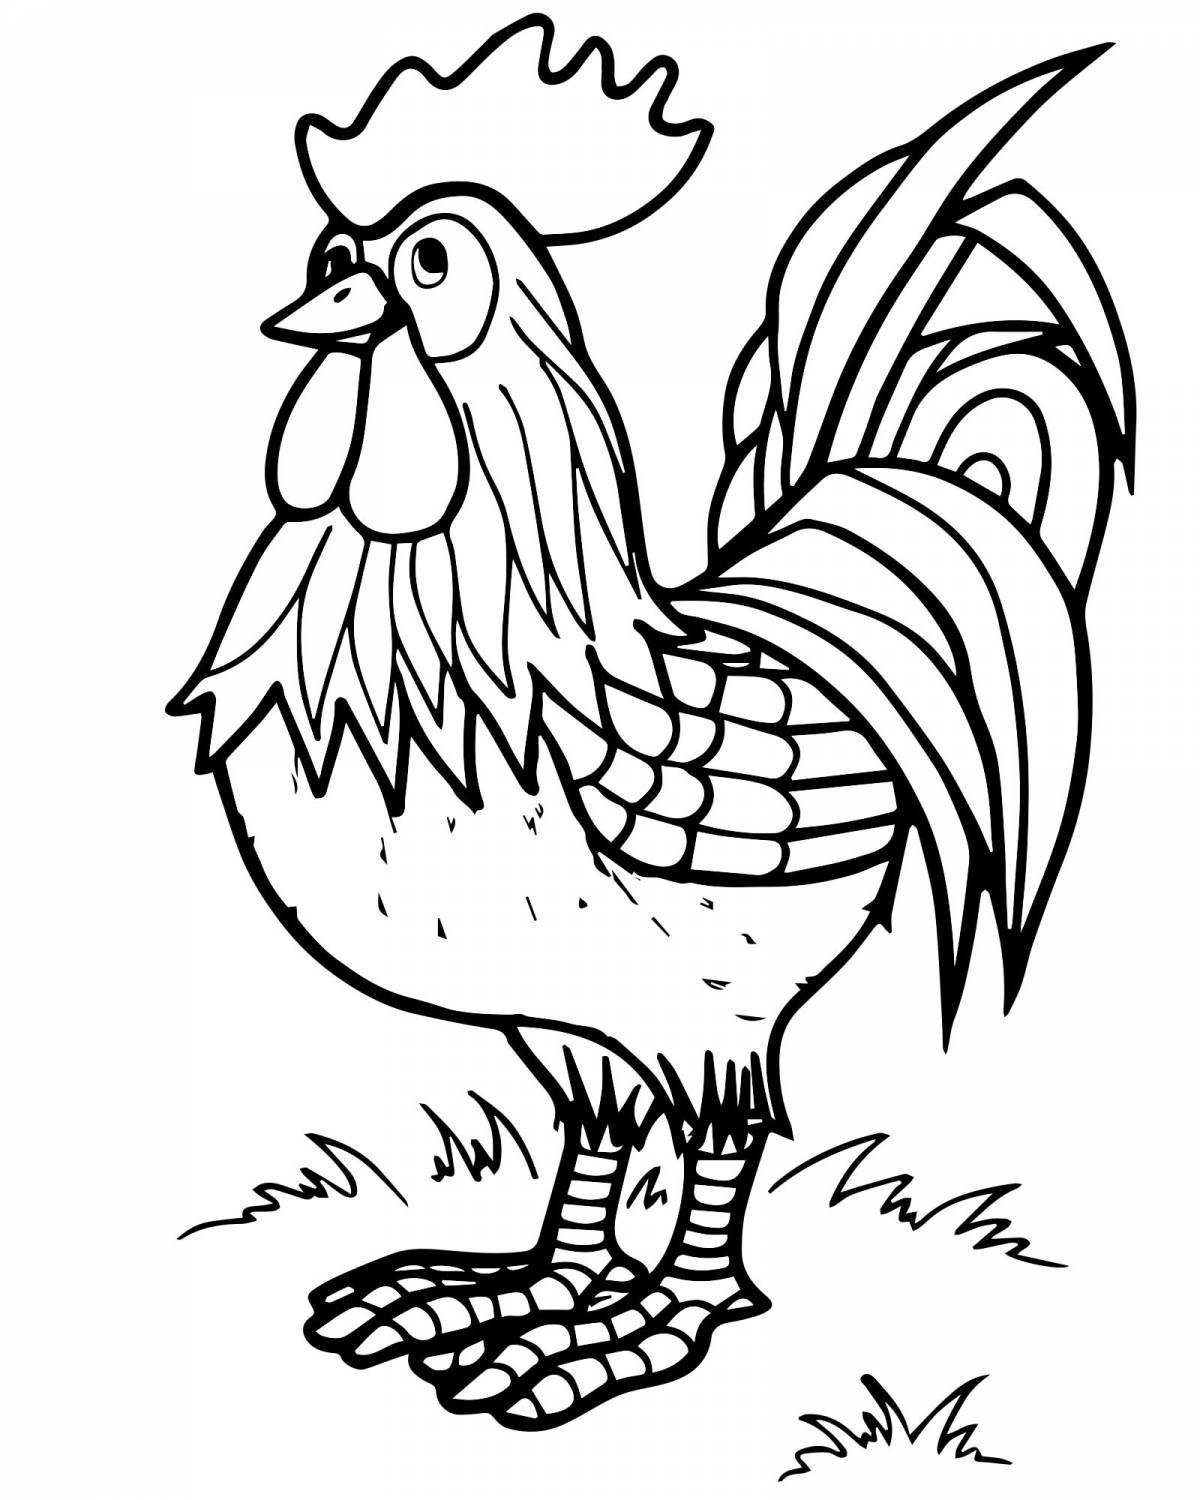 Coloring book gorgeous rooster for preschoolers 3-4 years old